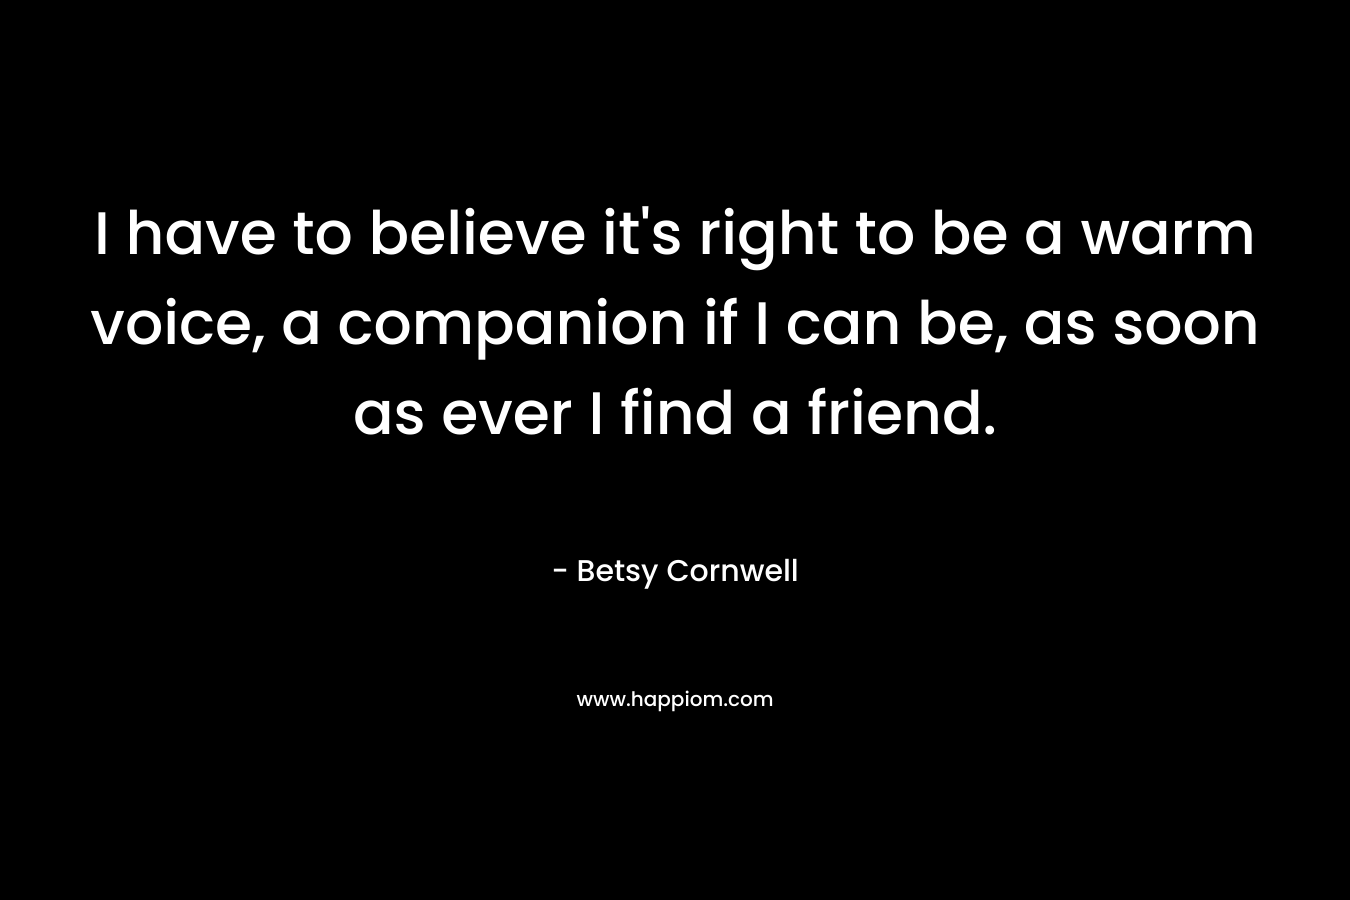 I have to believe it’s right to be a warm voice, a companion if I can be, as soon as ever I find a friend. – Betsy Cornwell